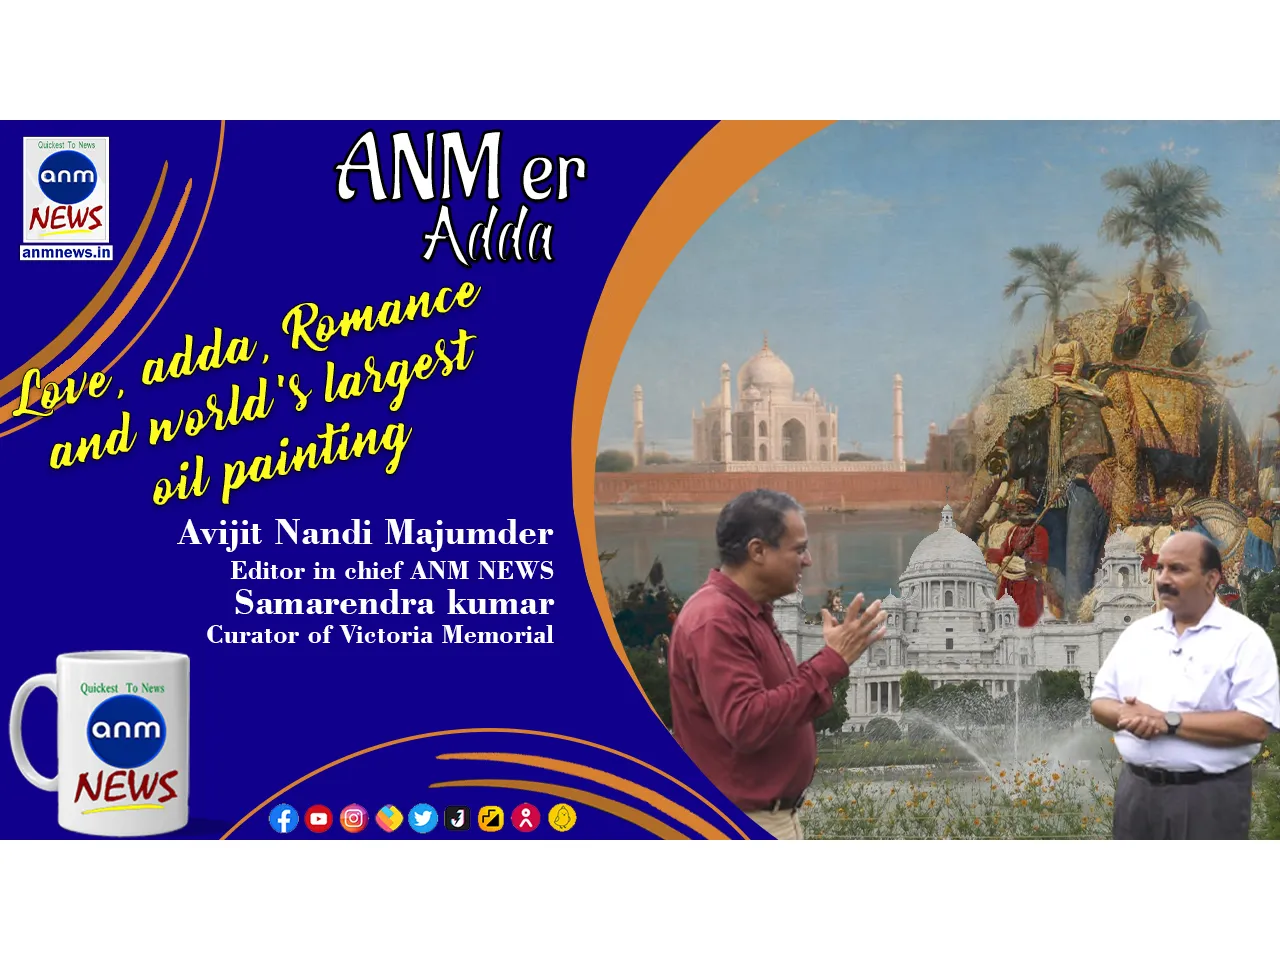 Love, adda, Romance and world's largest oil painting